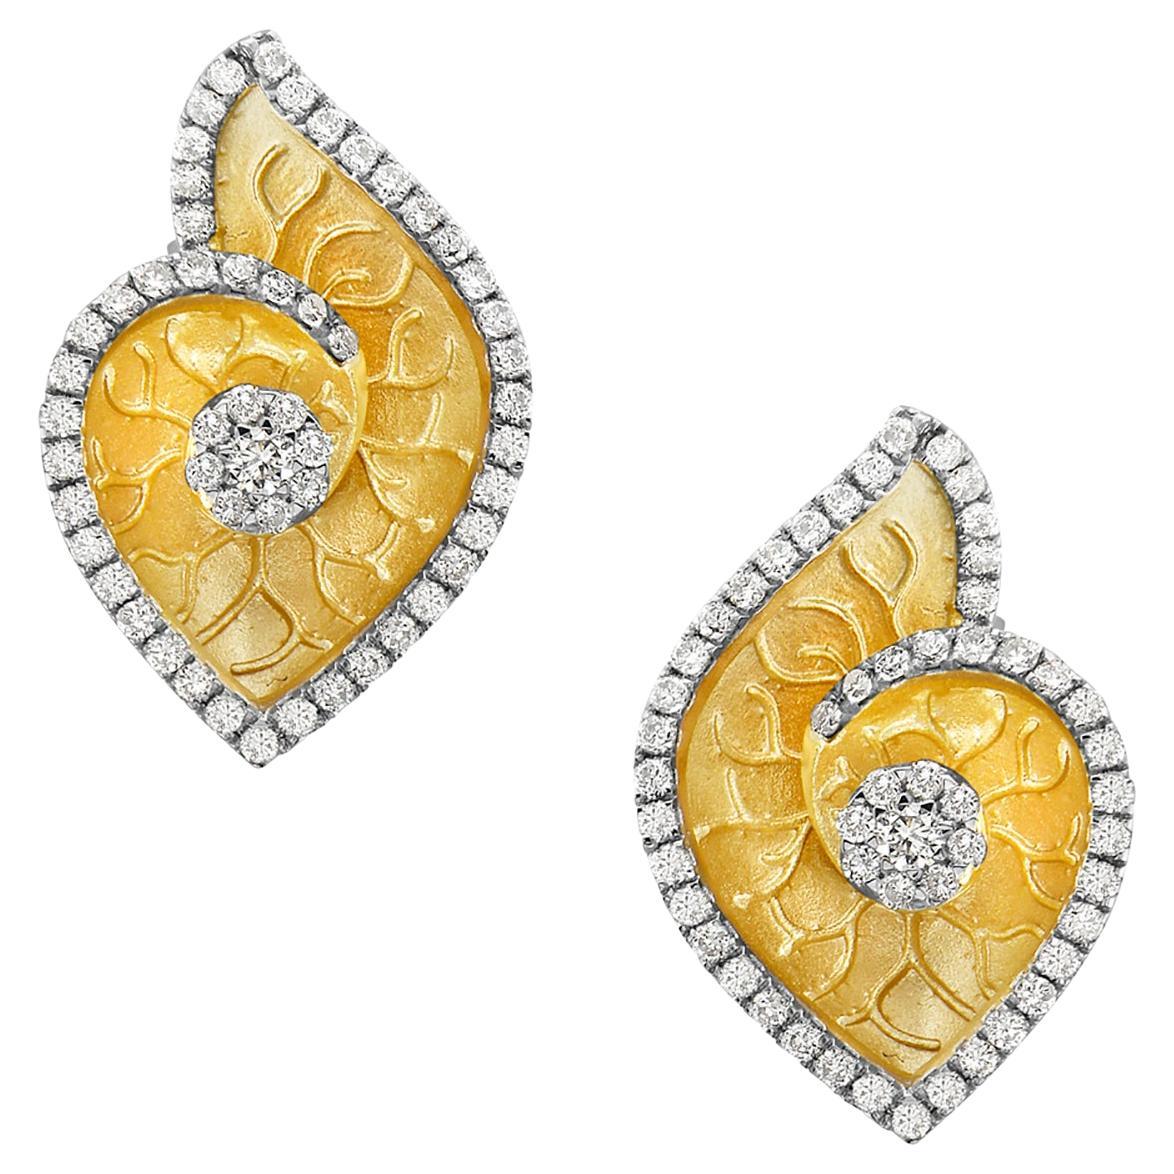 Carved Shell Shaped Earrings Made in 14k Yellow Gold with Diamonds on the Edge